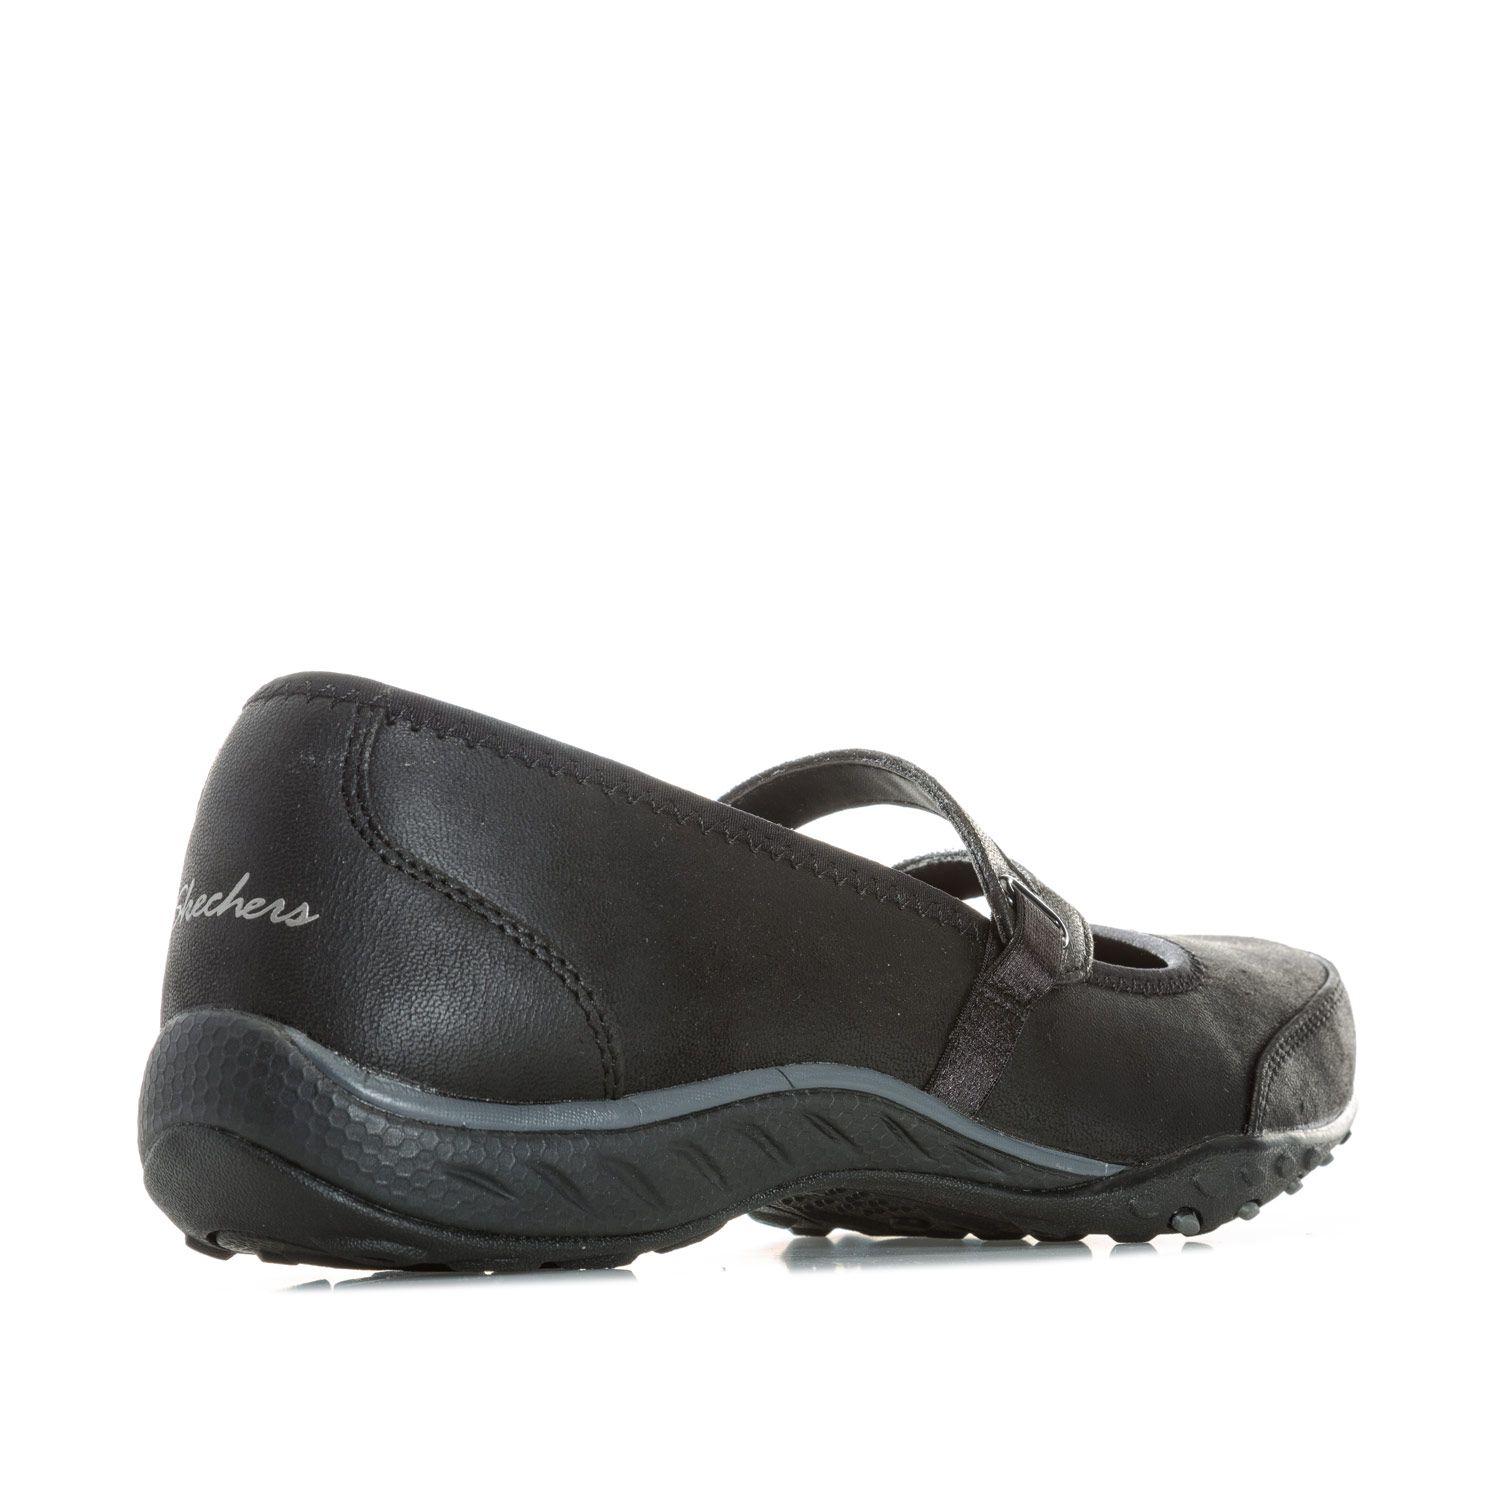 Black Skechers Womens Relaxed Fit Breathe Shoes Get The Label